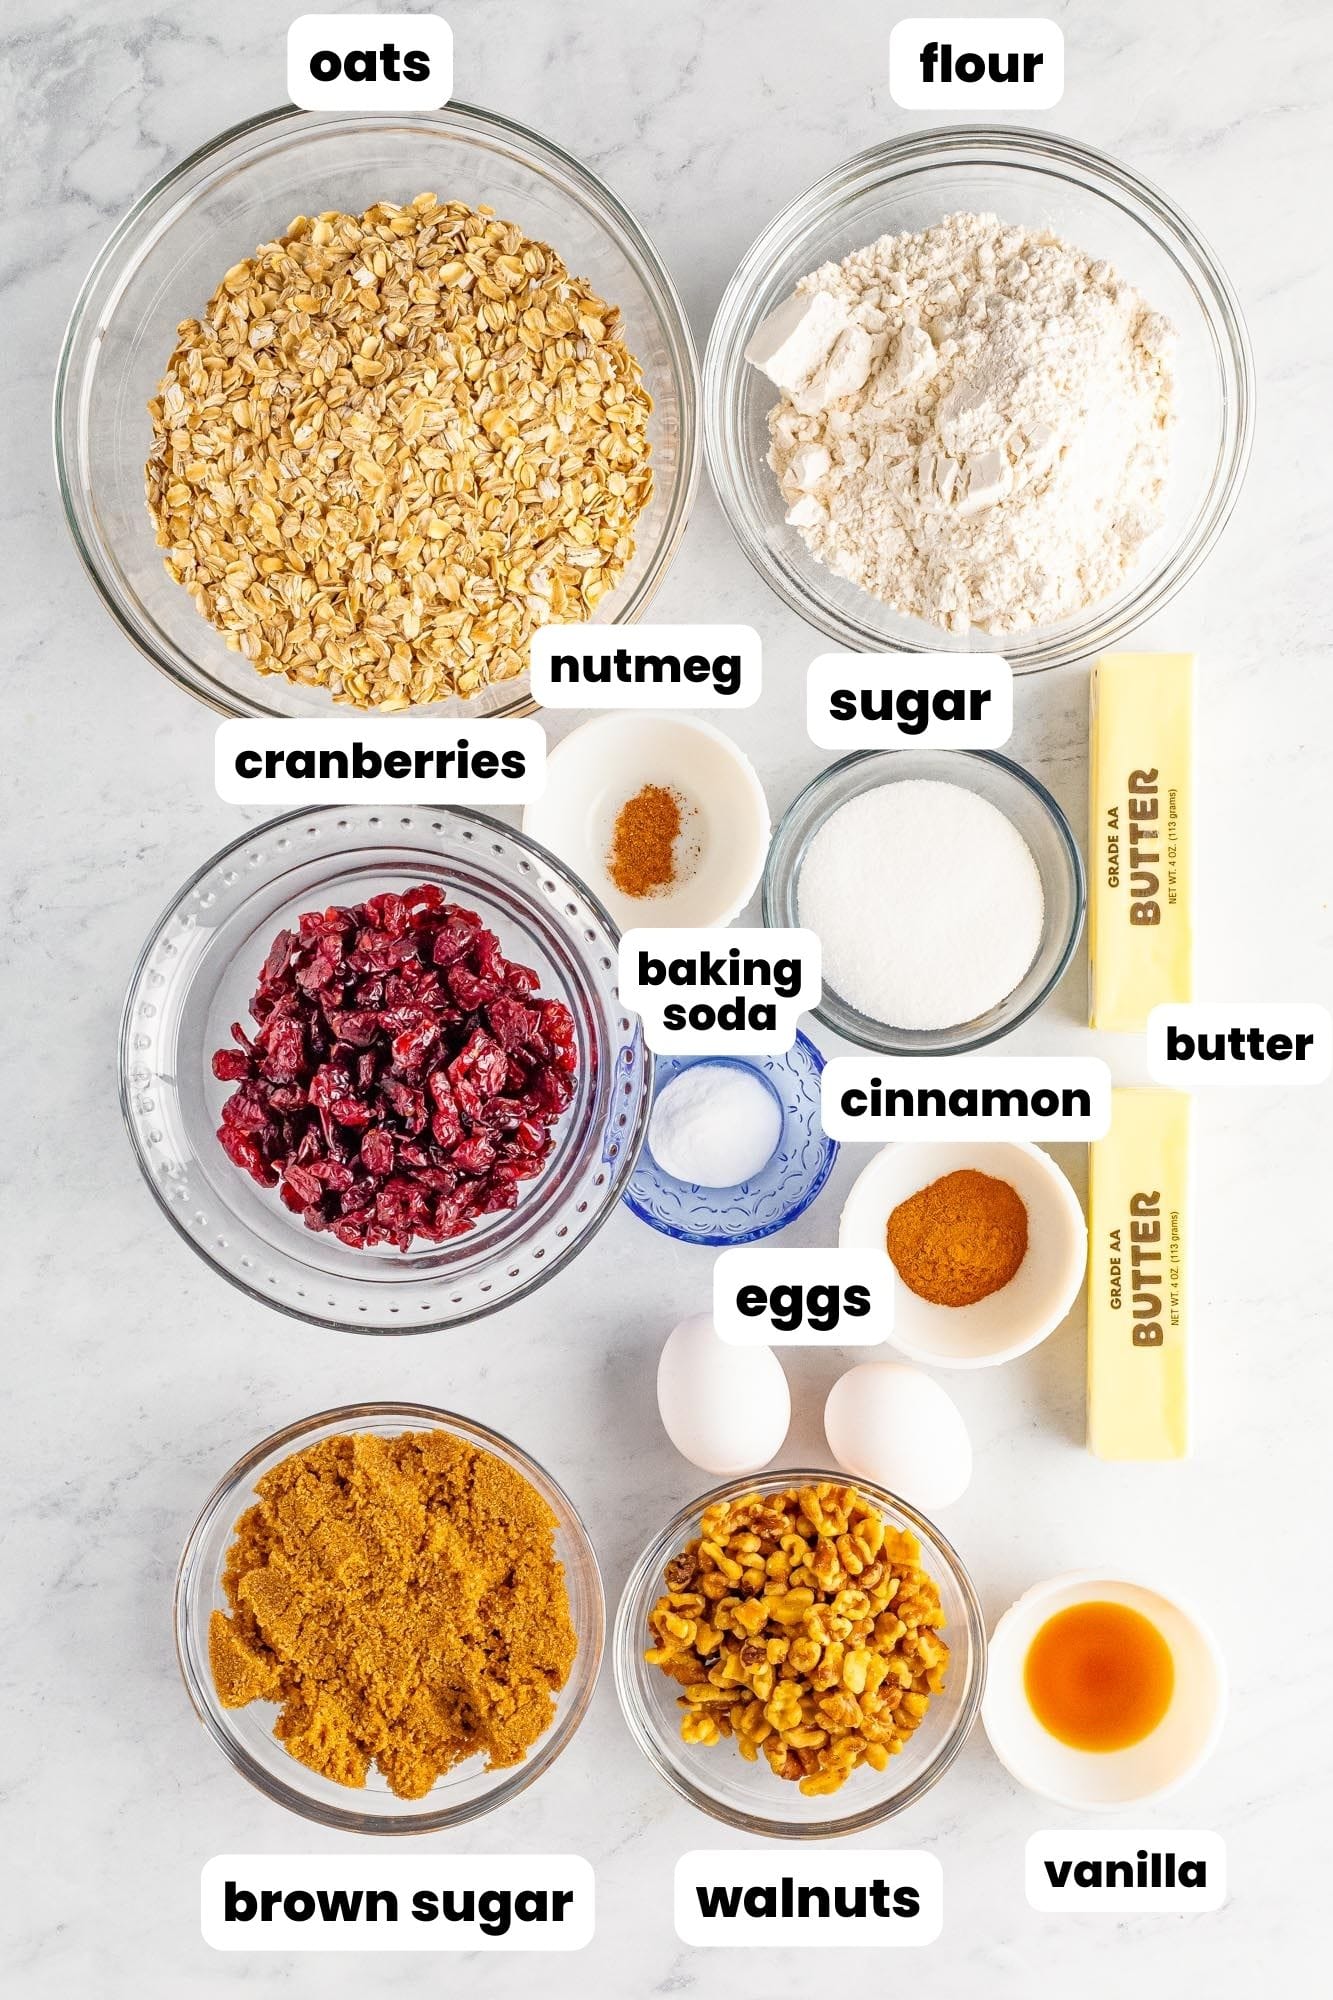 Ingredients needed to make oatmeal cranberry walnut cookies, including old-fashioned oats, all purpose flour, dried cranberries, plain sugar, brown sugar, walnut pieces, eggs, vanilla, butter, baking soda, salt, and some spices.